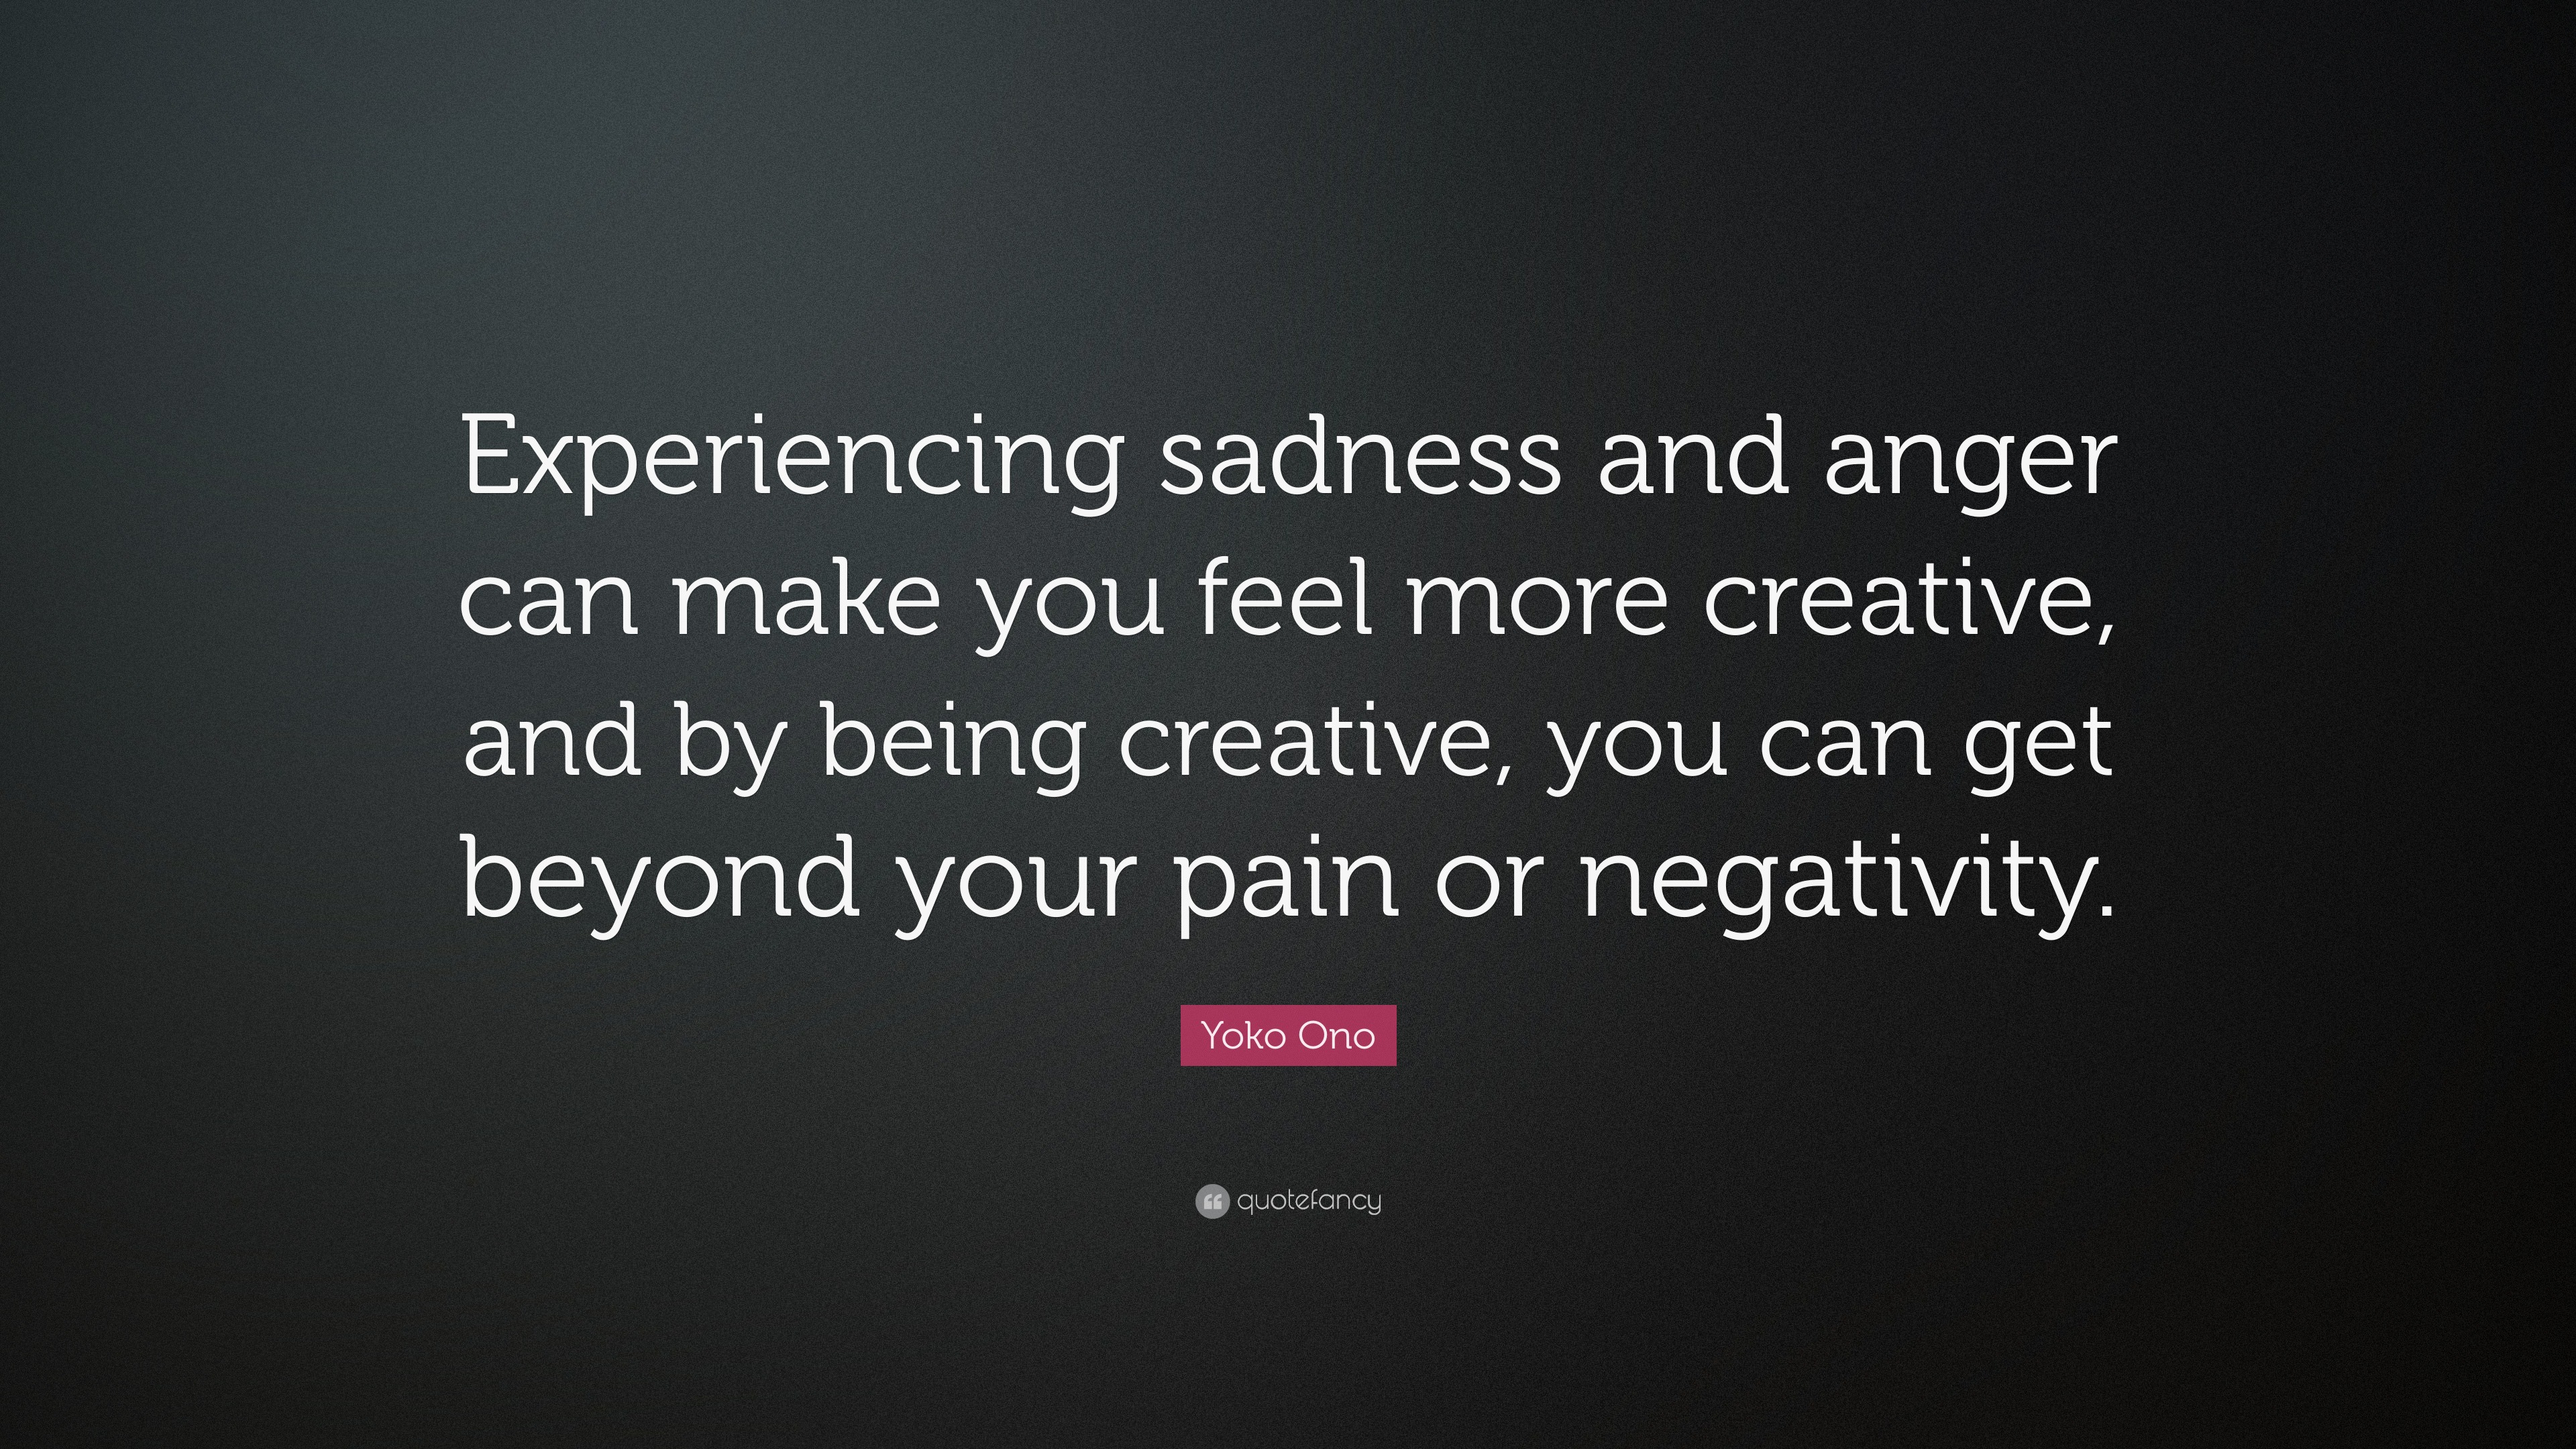 Yoko Ono Quote: “Experiencing sadness and anger can make you feel more ...